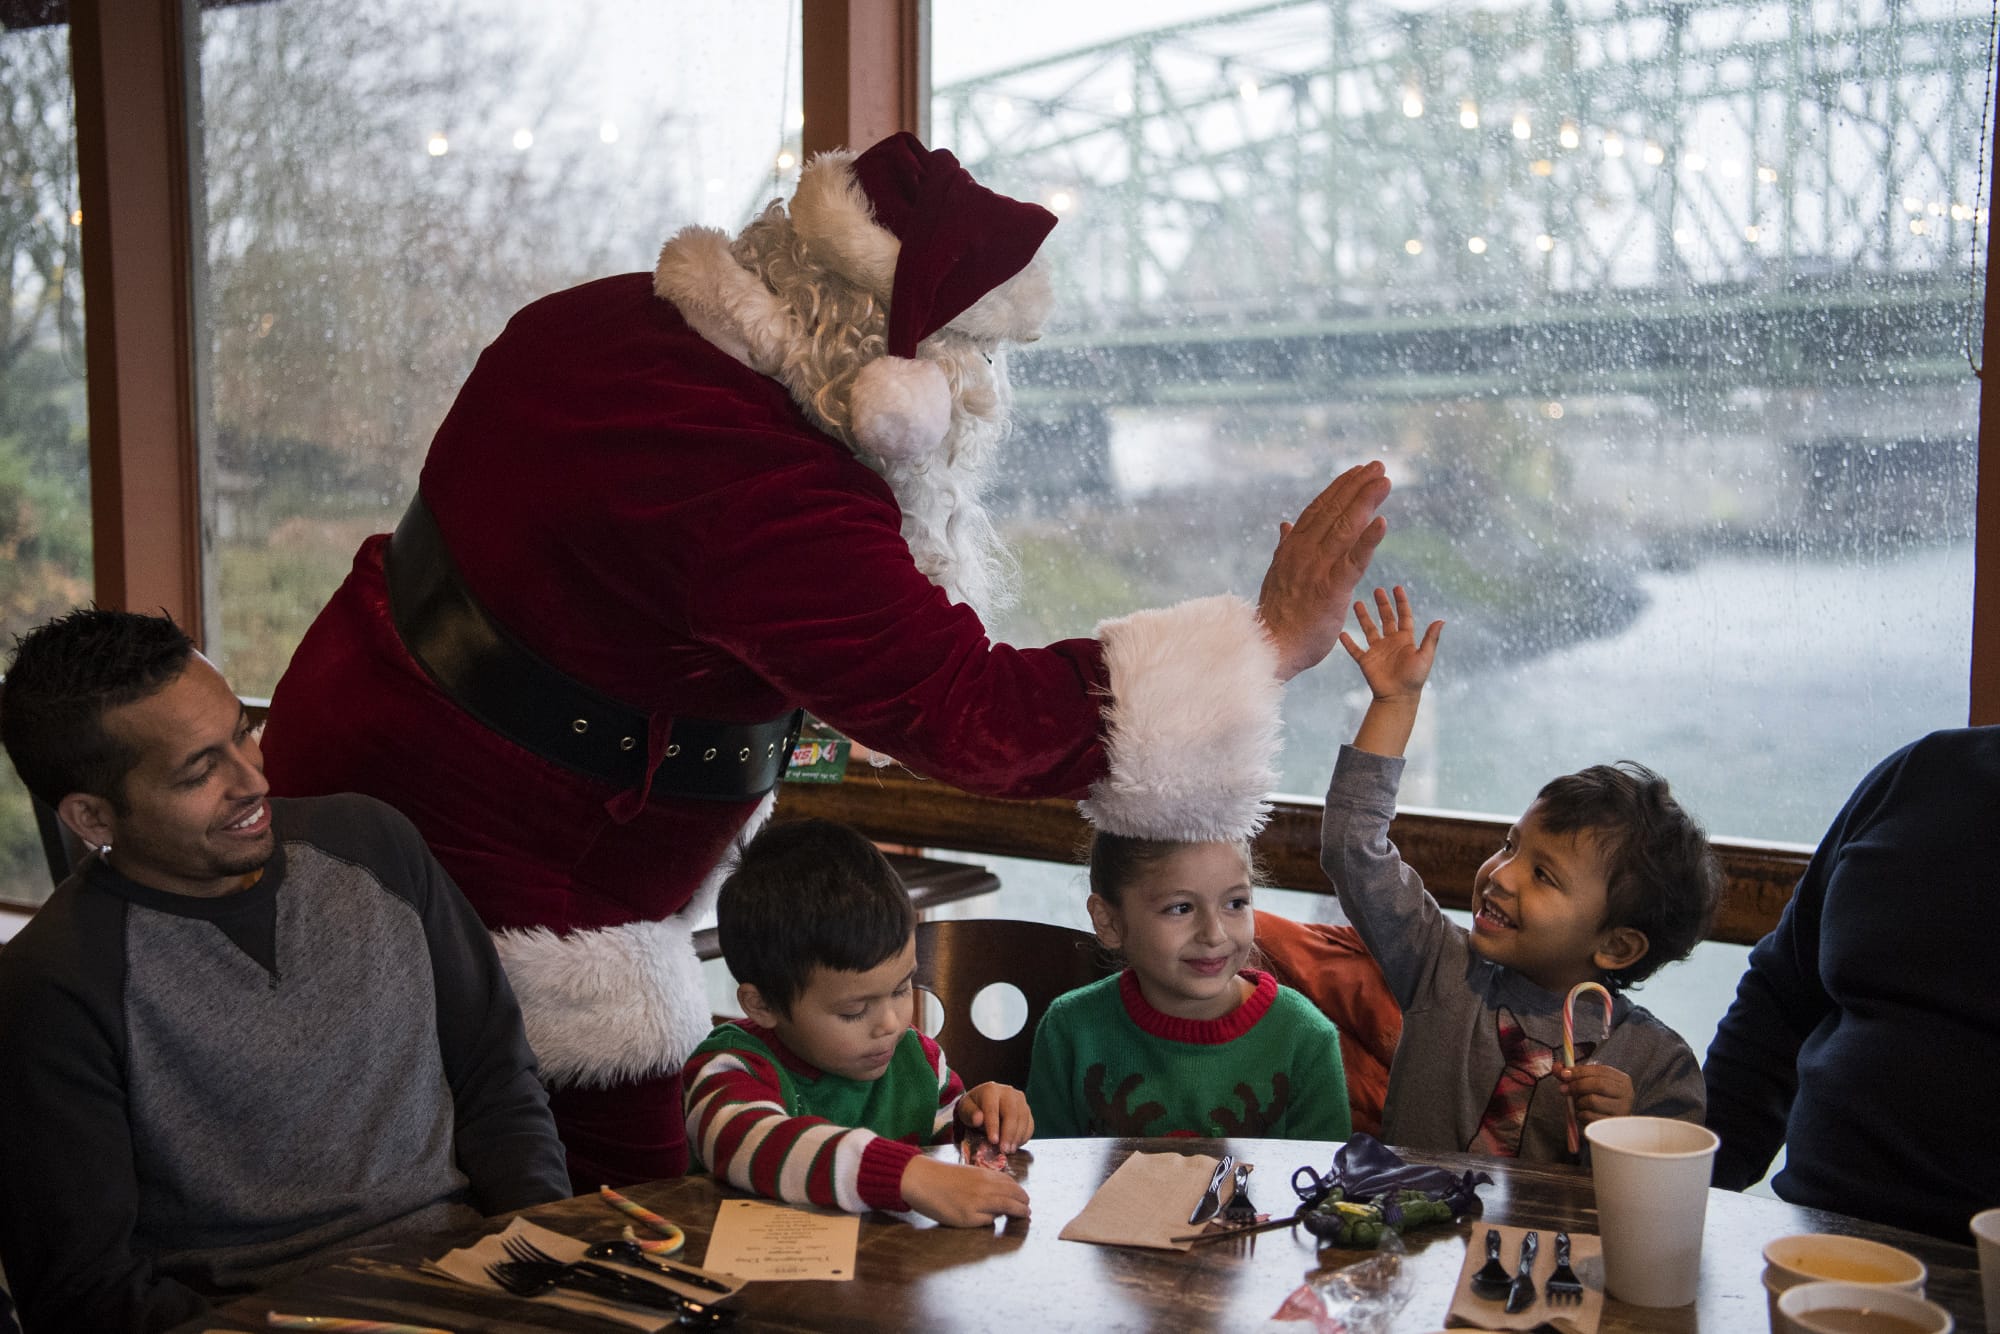 Dressed as Santa, Vince Hochanadel high-fives Rodrigo Solis, 3, at the free Thanksgiving meal at WareHouse '23 in Vancouver last month. Solis' cousins Emily Reseadiz, 6, center, Daniel Reseadiz, 3, center left, and Solis's uncle Victor Gonzalez, left, sit beside him. The meal was hosted by state Court of Appeals Judge Rich Melnick, Chuck Chronis and Mark Matthias.